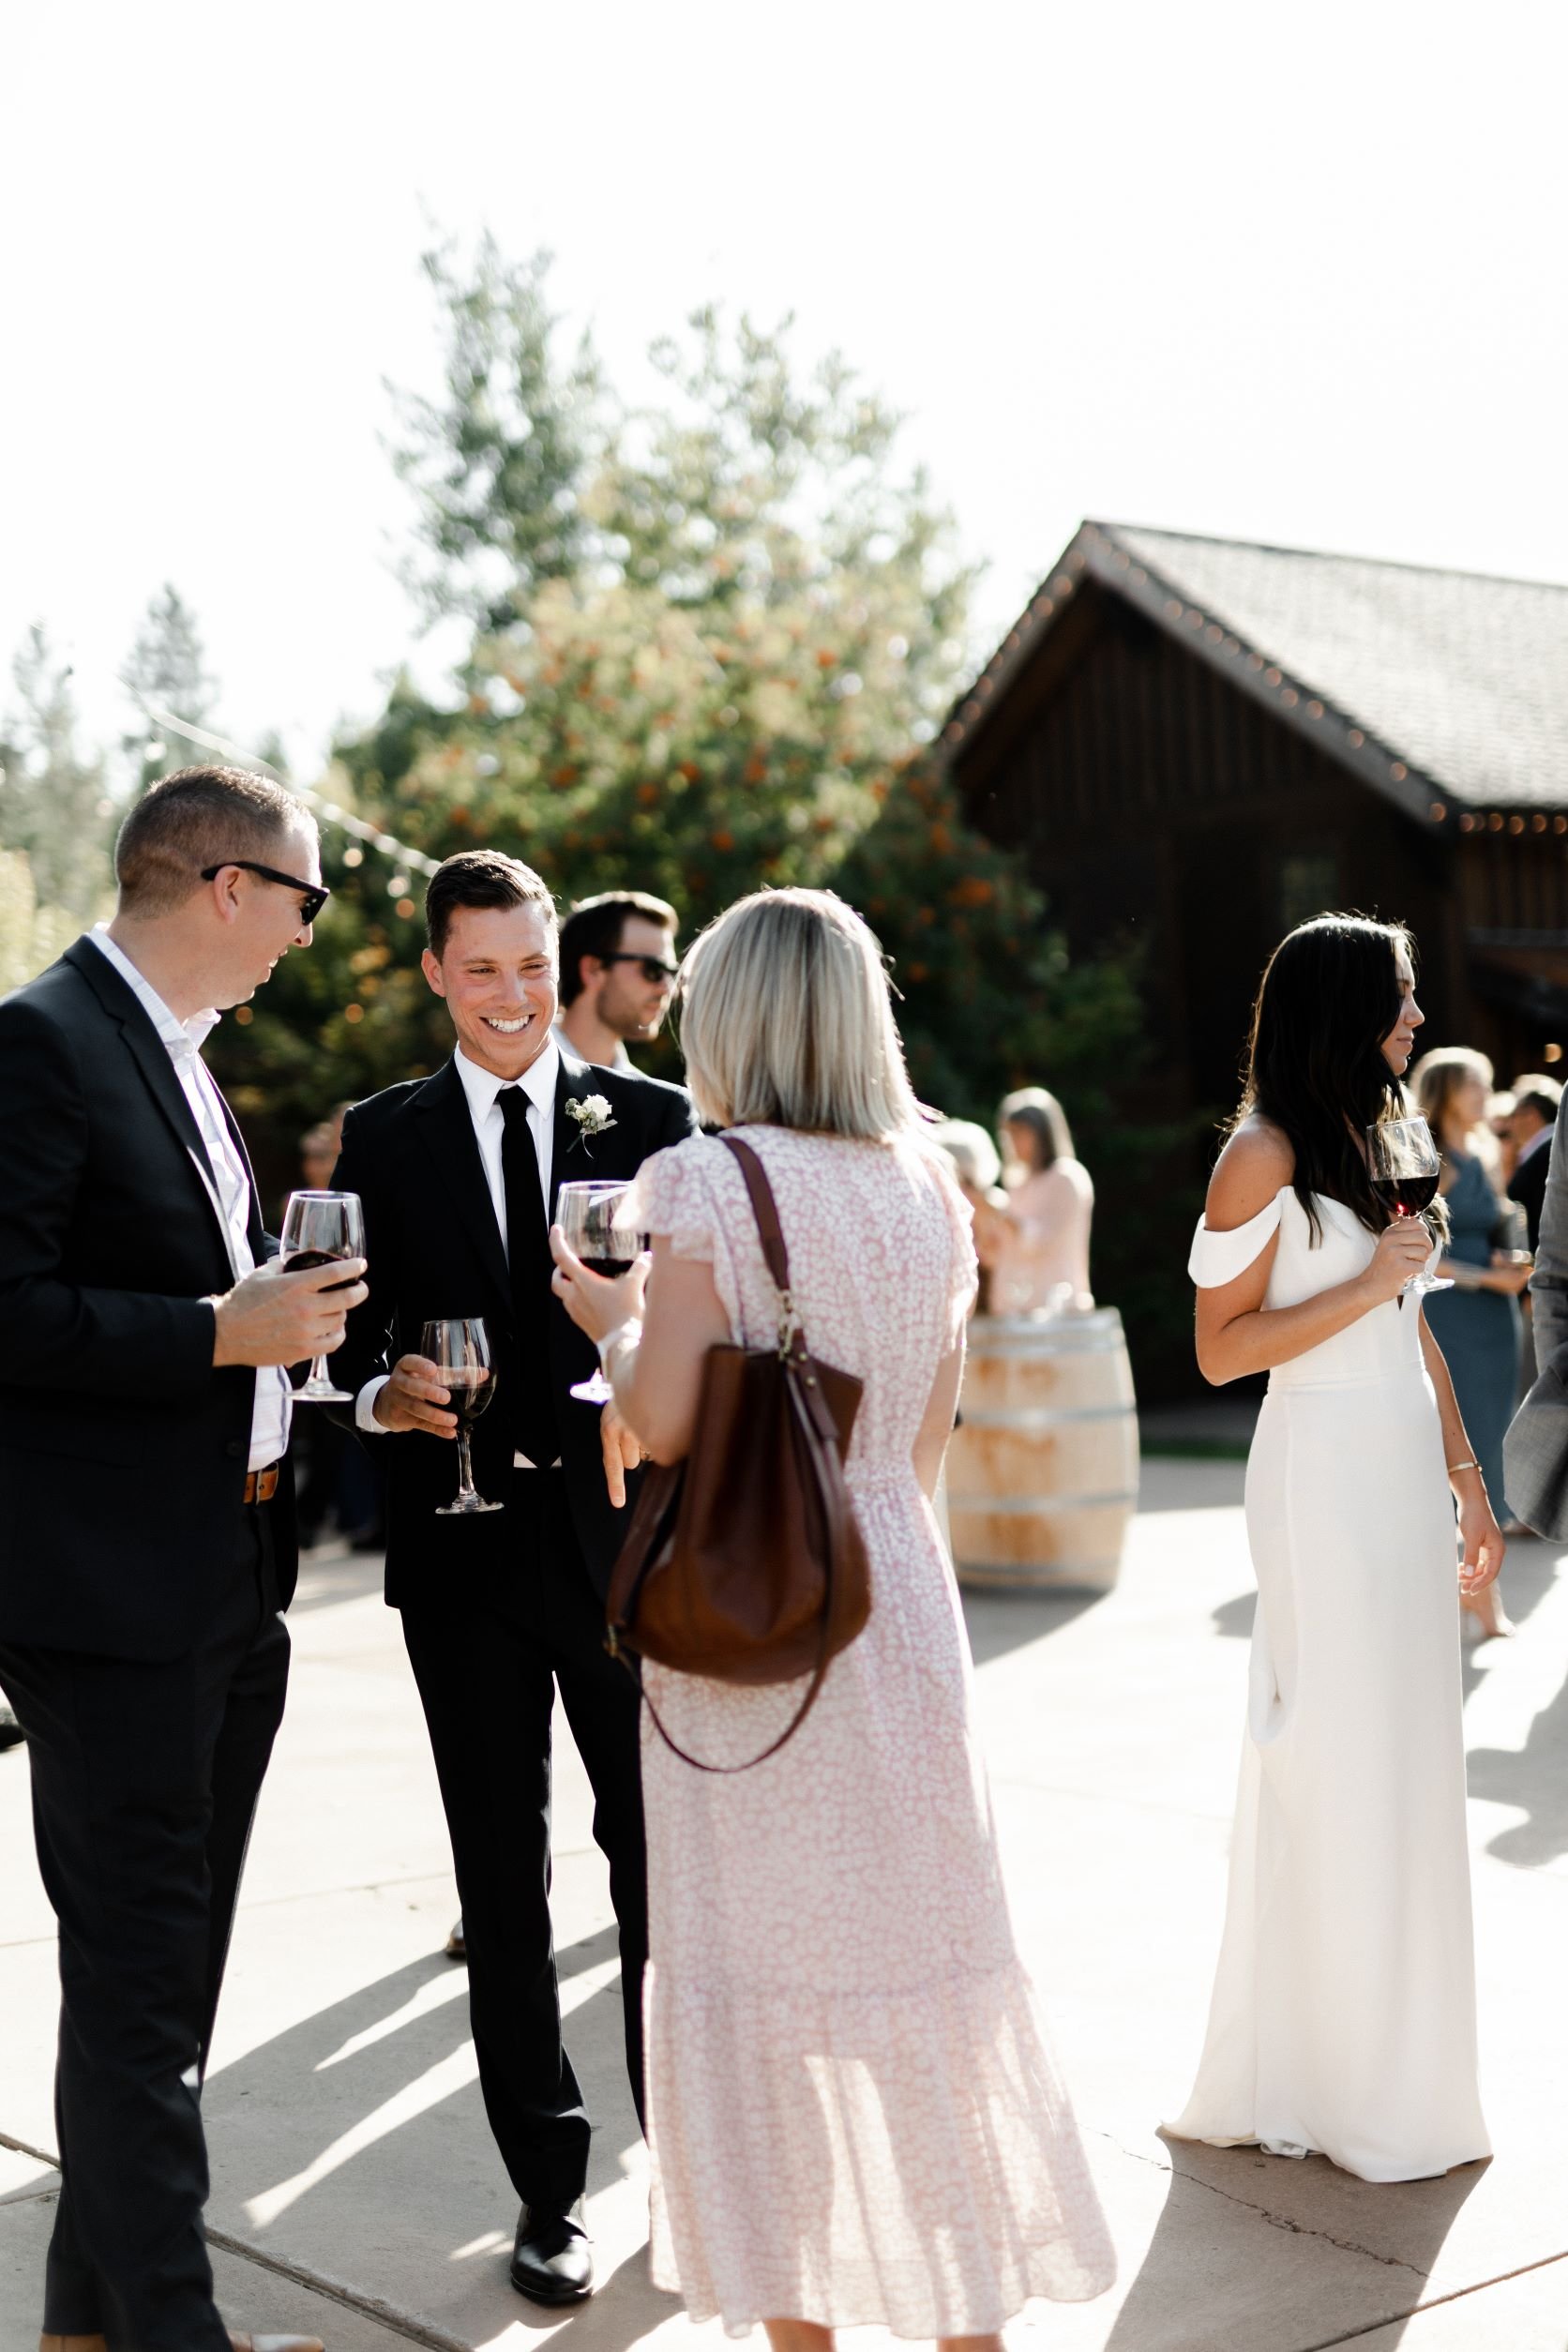 Swiftwater-Cellars-Wedding-Cocktail-Hour-Pacific-Engagements-Wedding-Planning-and-Design